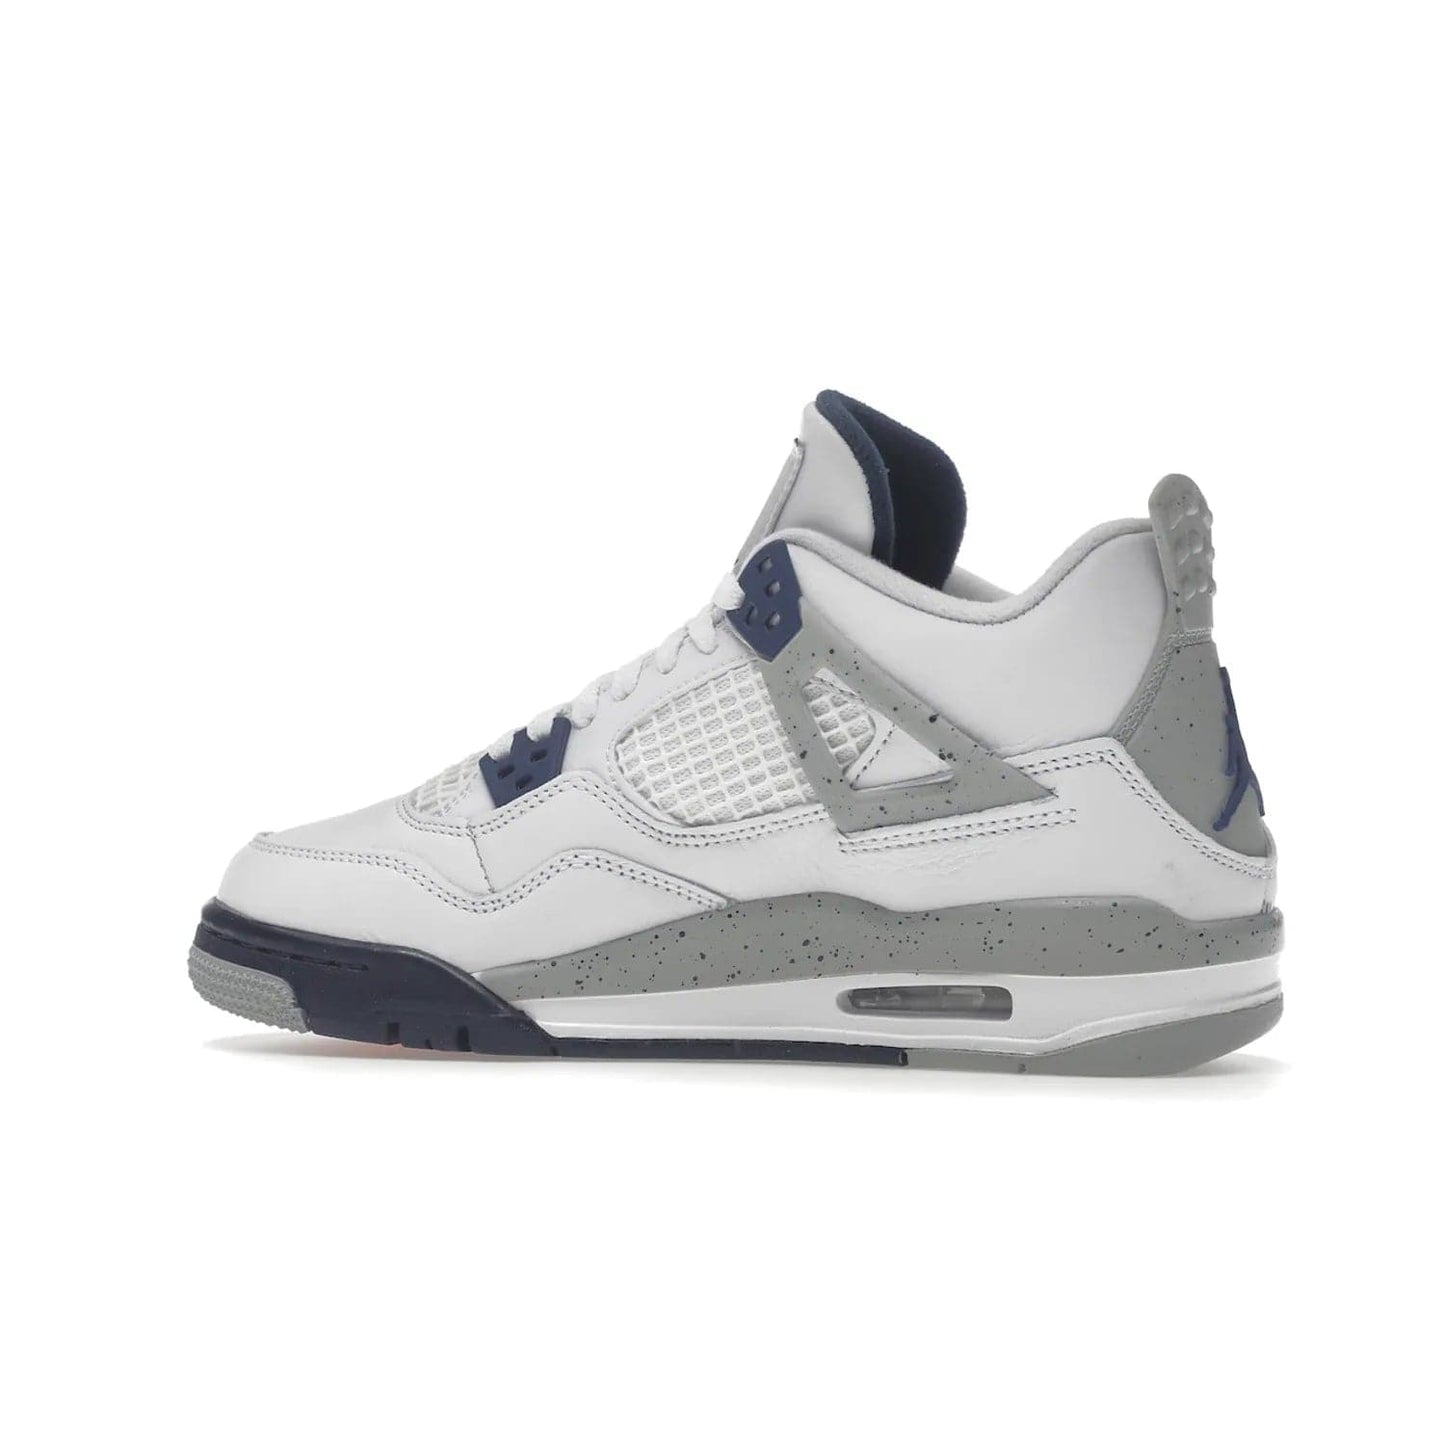 Jordan 4 Retro Midnight Navy (GS) - Image 21 - Only at www.BallersClubKickz.com - Shop the Air Jordan 4 Retro Midnight Navy GS. The white leather upper features black support wings & heel tab, navy eyelets & woven tongue tag with Jumpman logos. The midsole features two-tone polyurethane insole & AIR units in the heel & forefoot. Get the white/midnight navy/light smoke grey/fire colorway & show off your style.